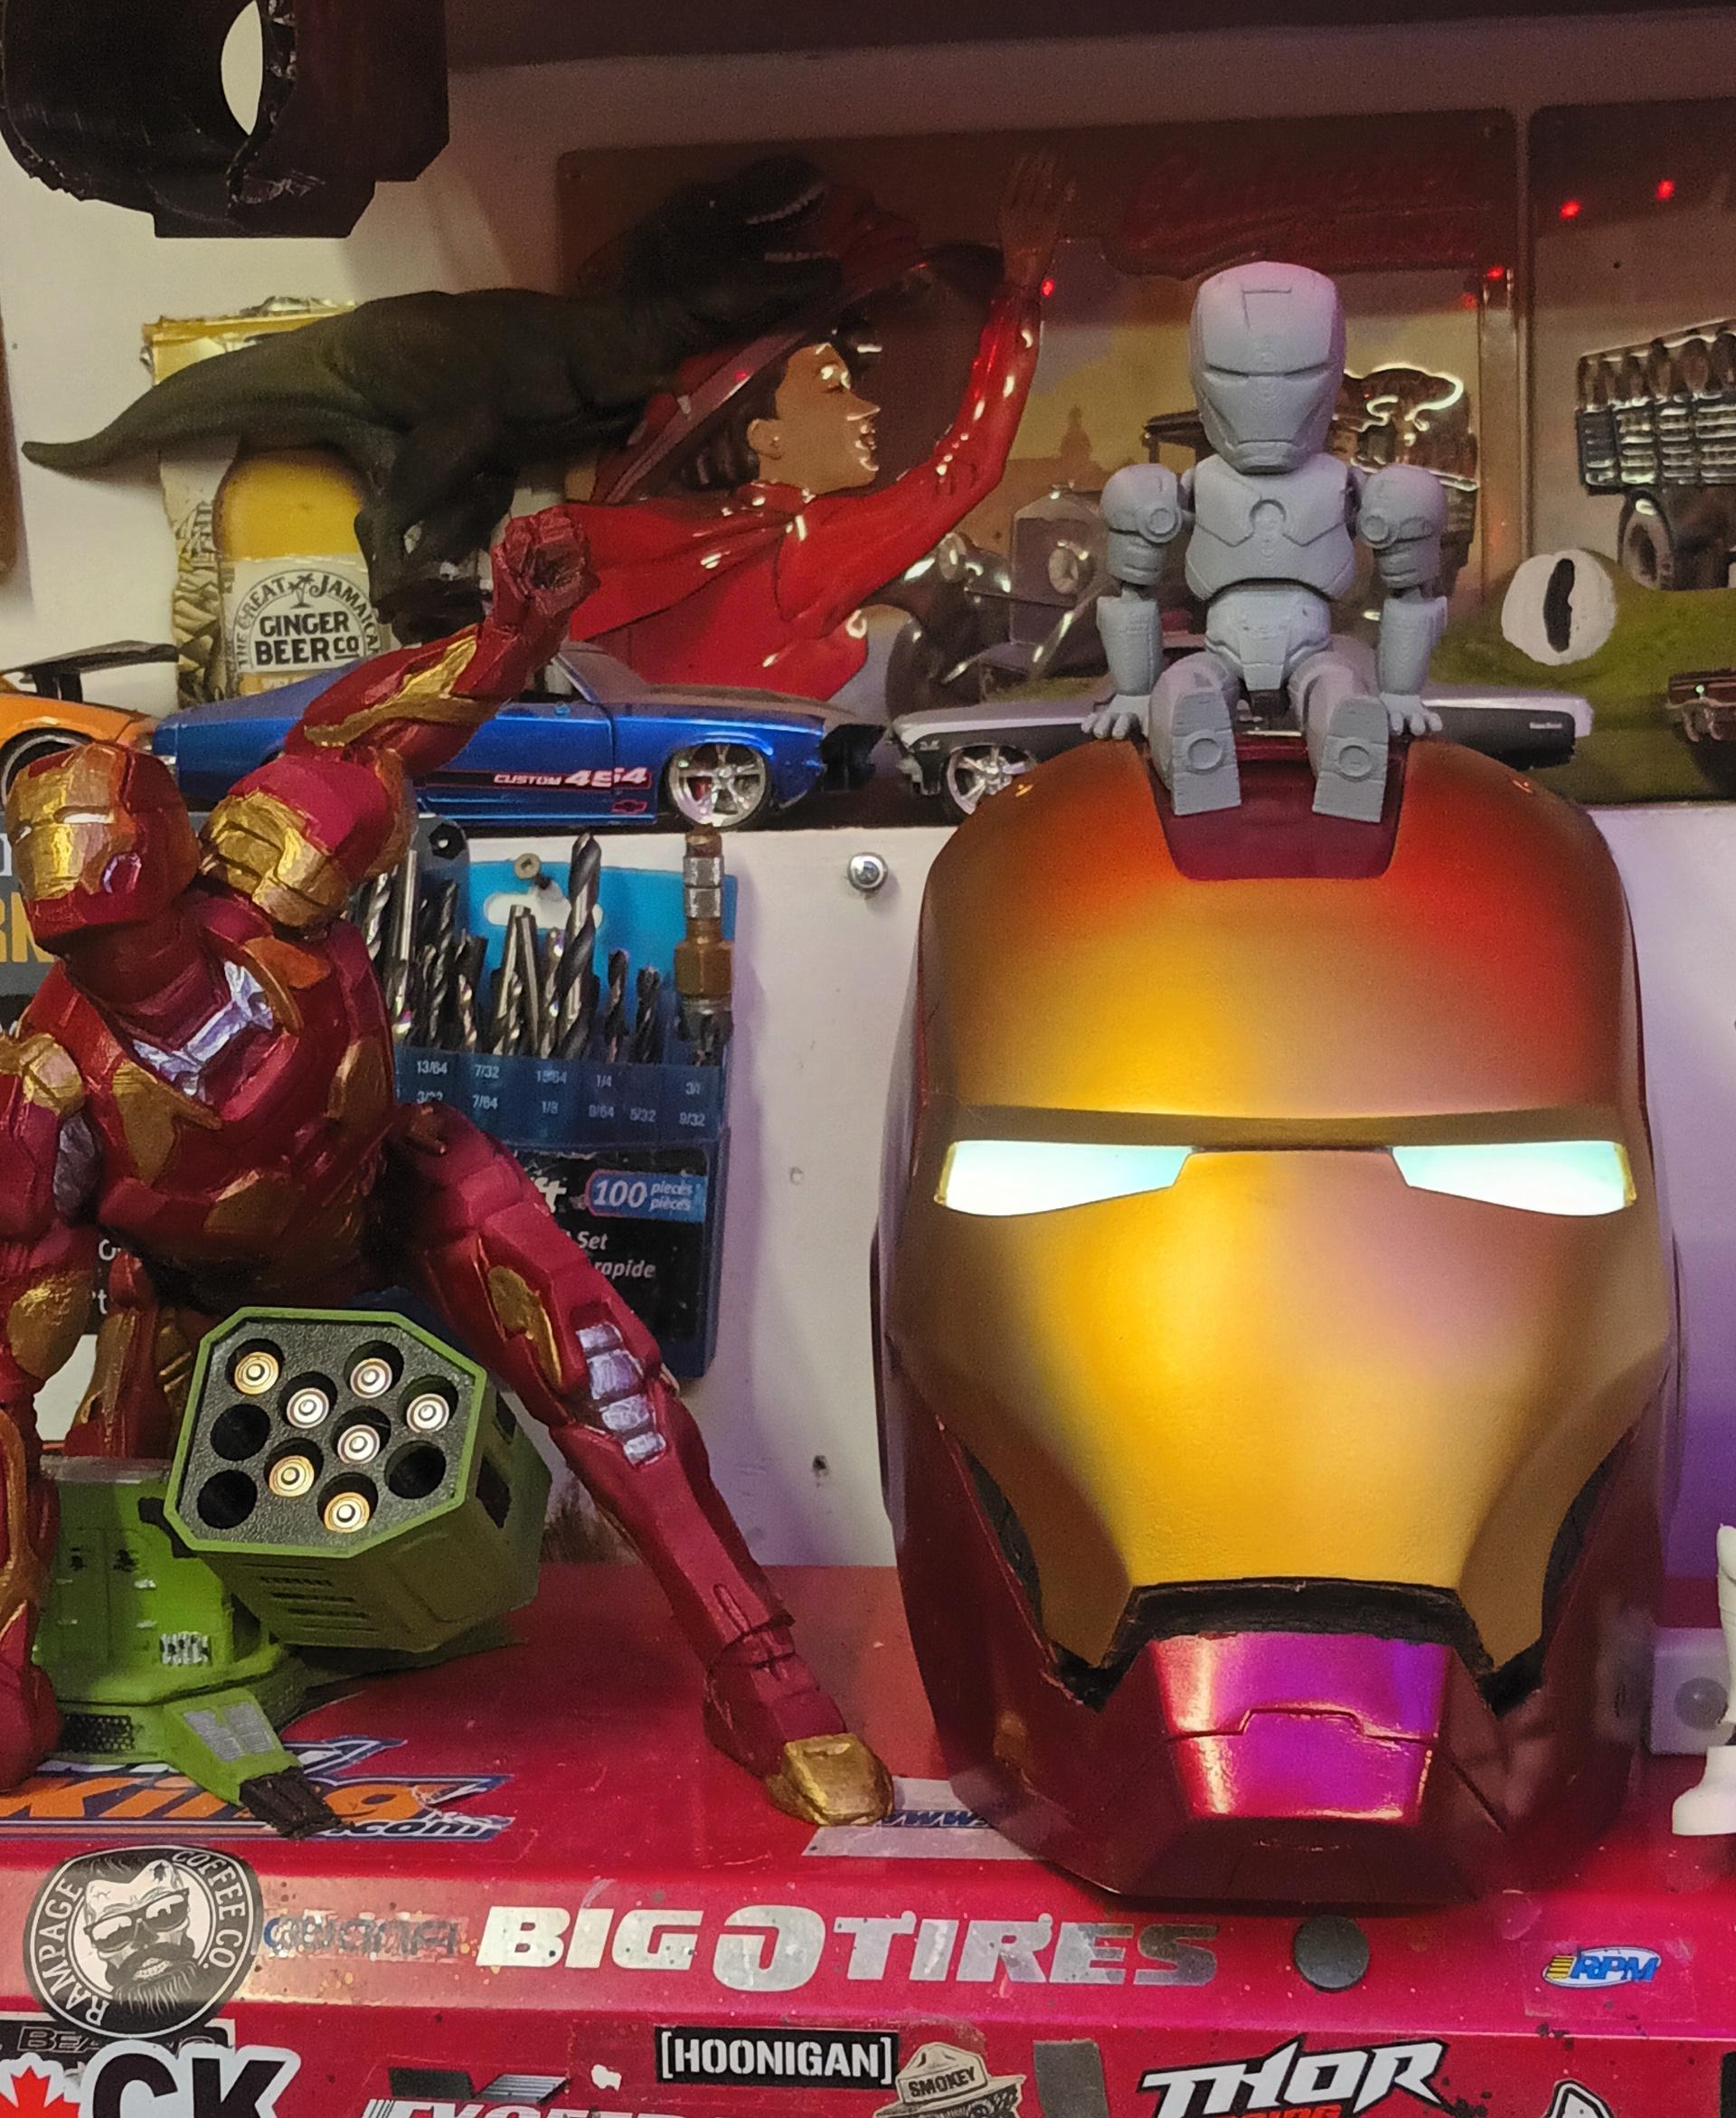 IronMan MK3 - These little Ironman figures are a cool addition to the collection - 3d model